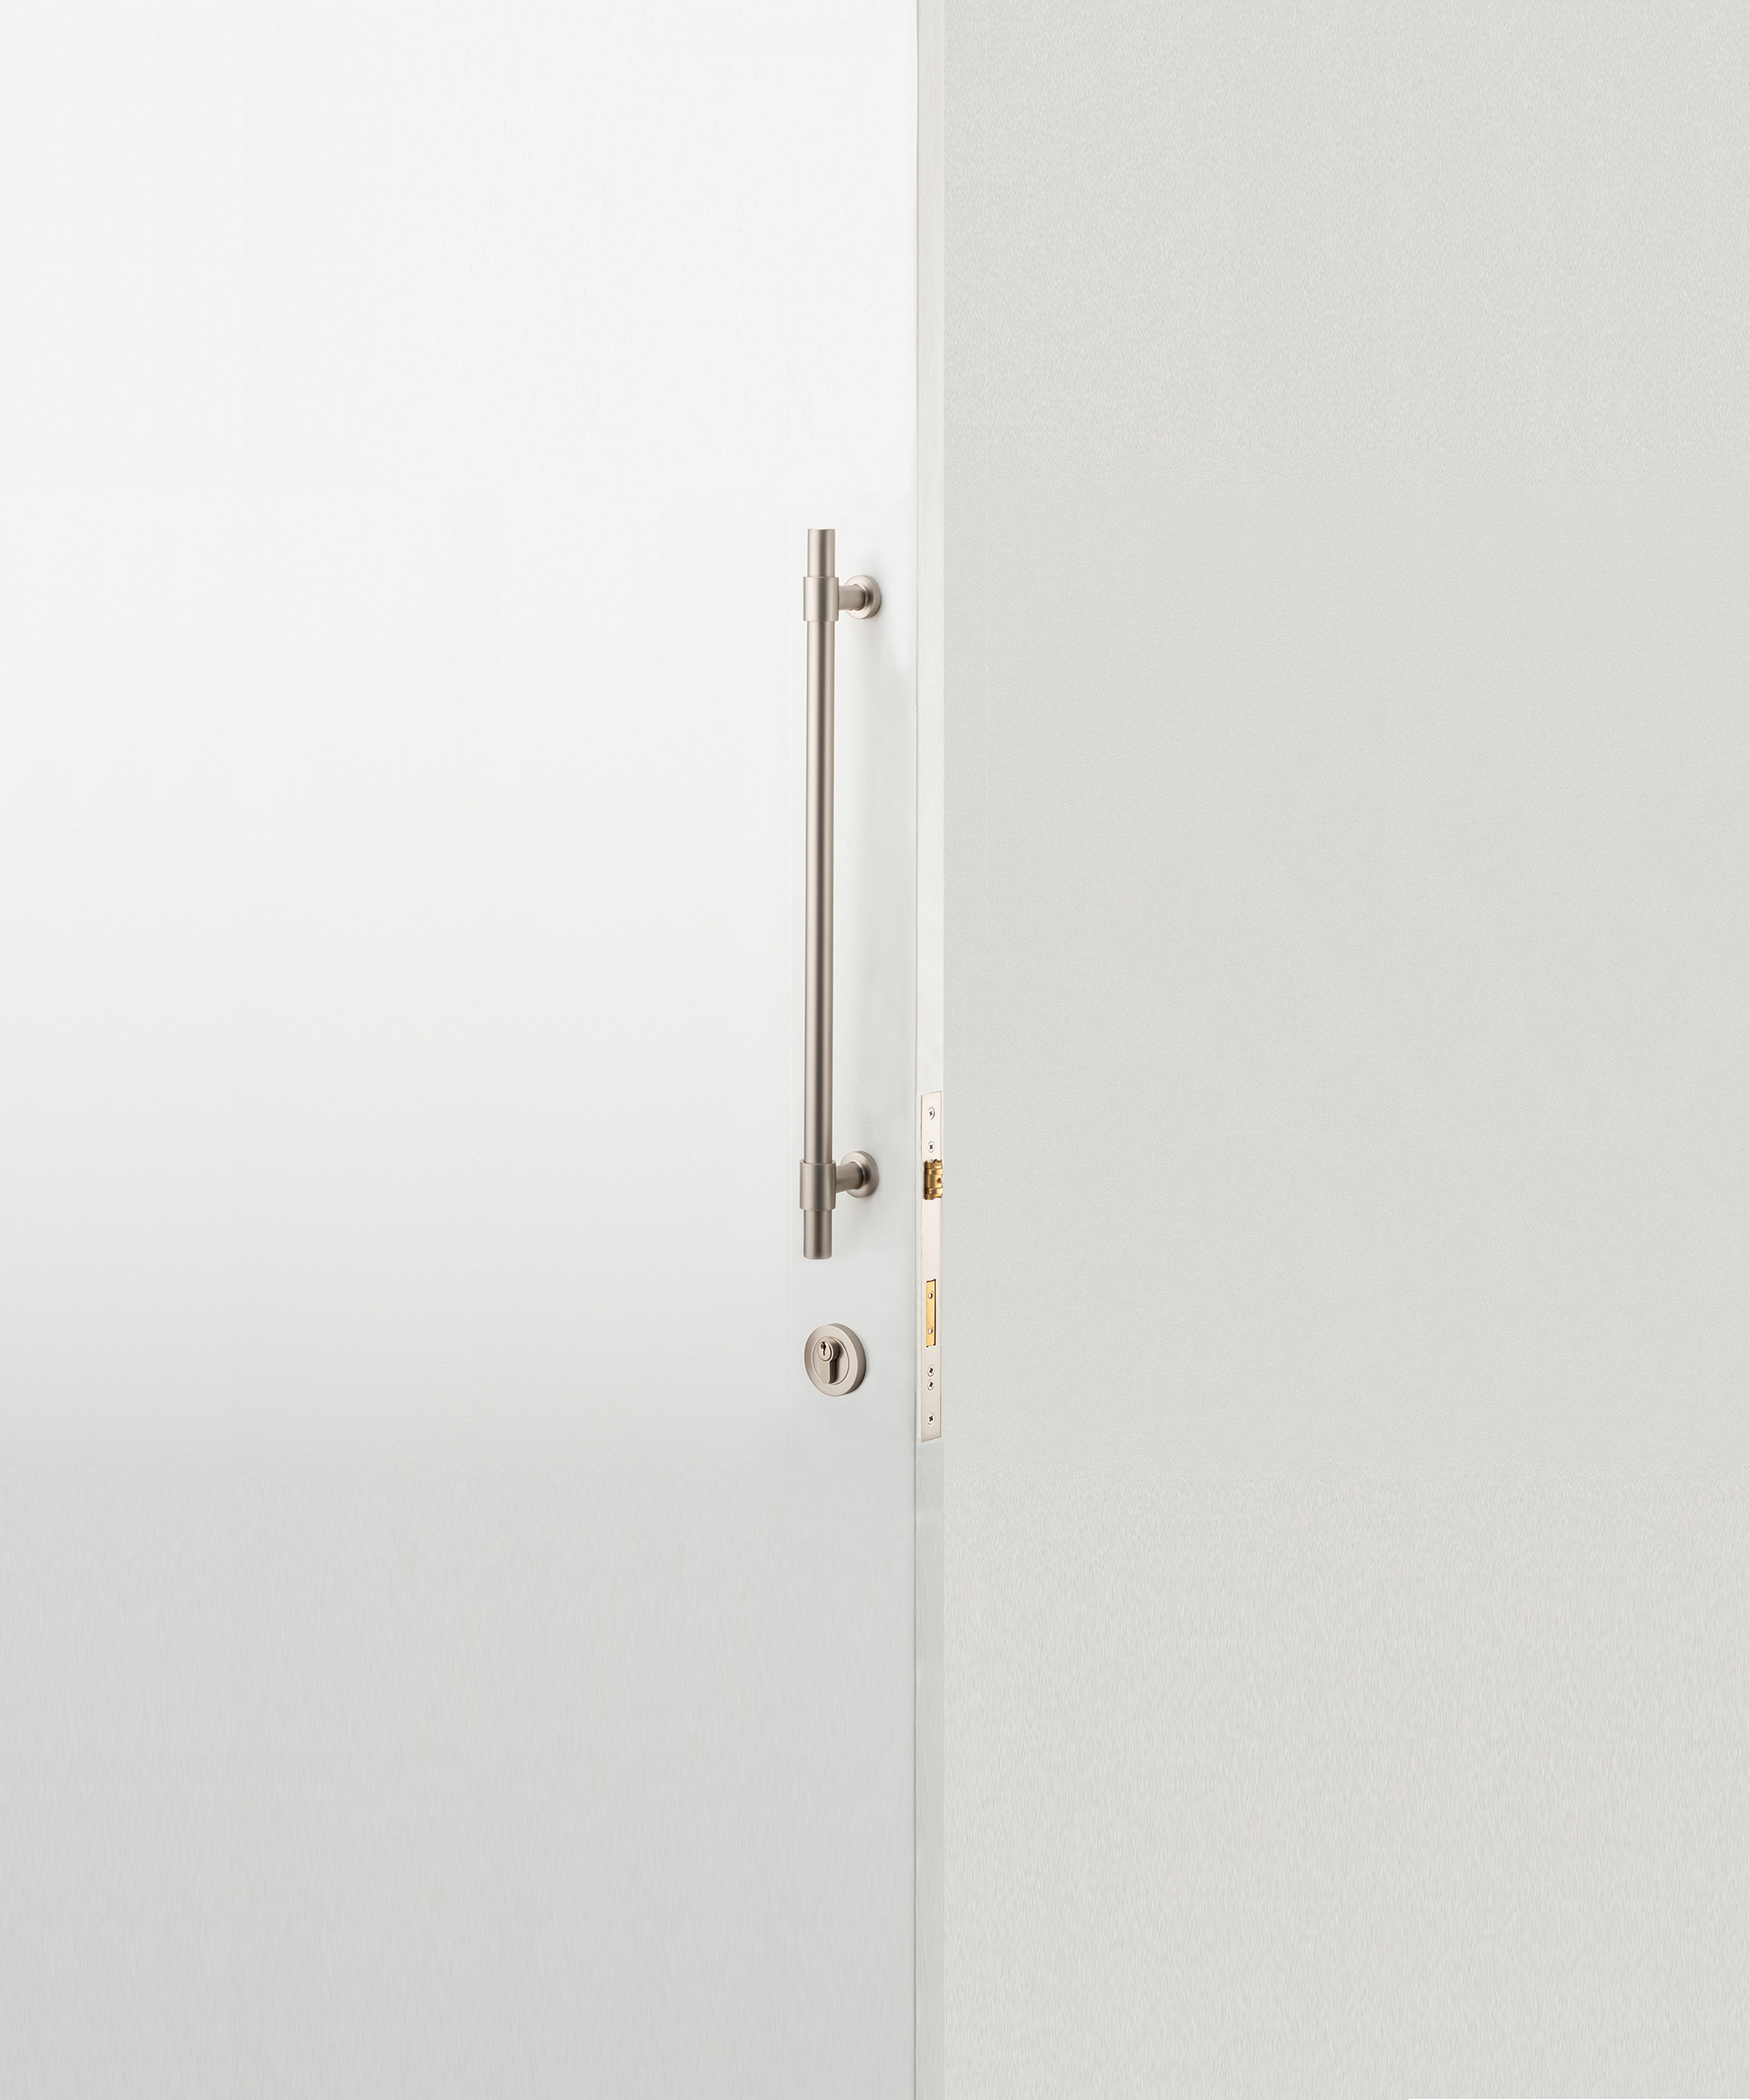 0481KENTR60KK - Berlin Pull Handle - 600mm Entrance Kit with Separate High Security Lock - Signature Brass - Entrance